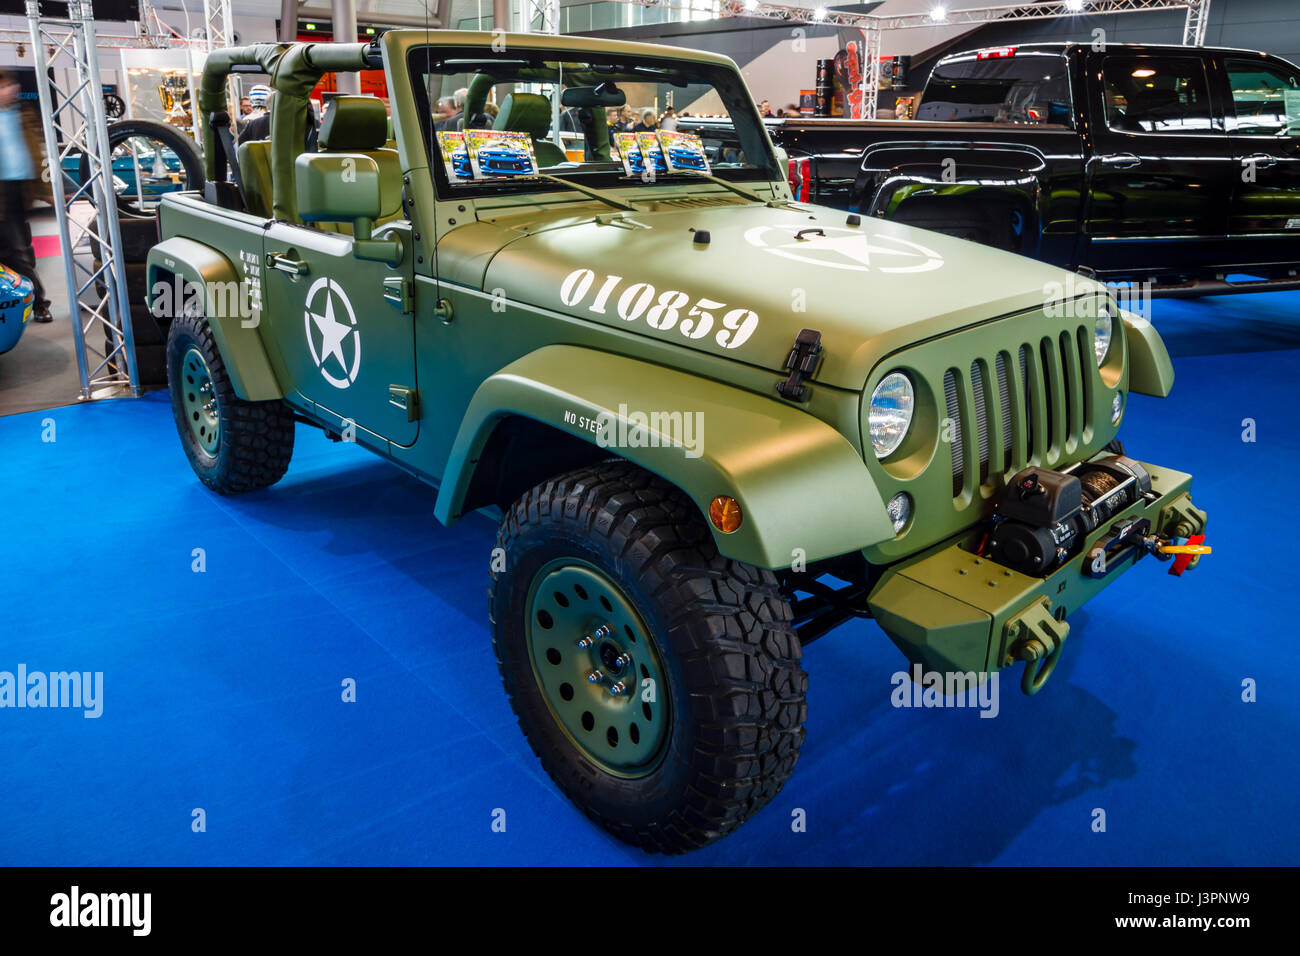 STUTTGART, GERMANY - MARCH 03, 2017: Compact SUV Jeep Wrangler (US Army  colored), 2017. Europe's greatest classic car exhibition 